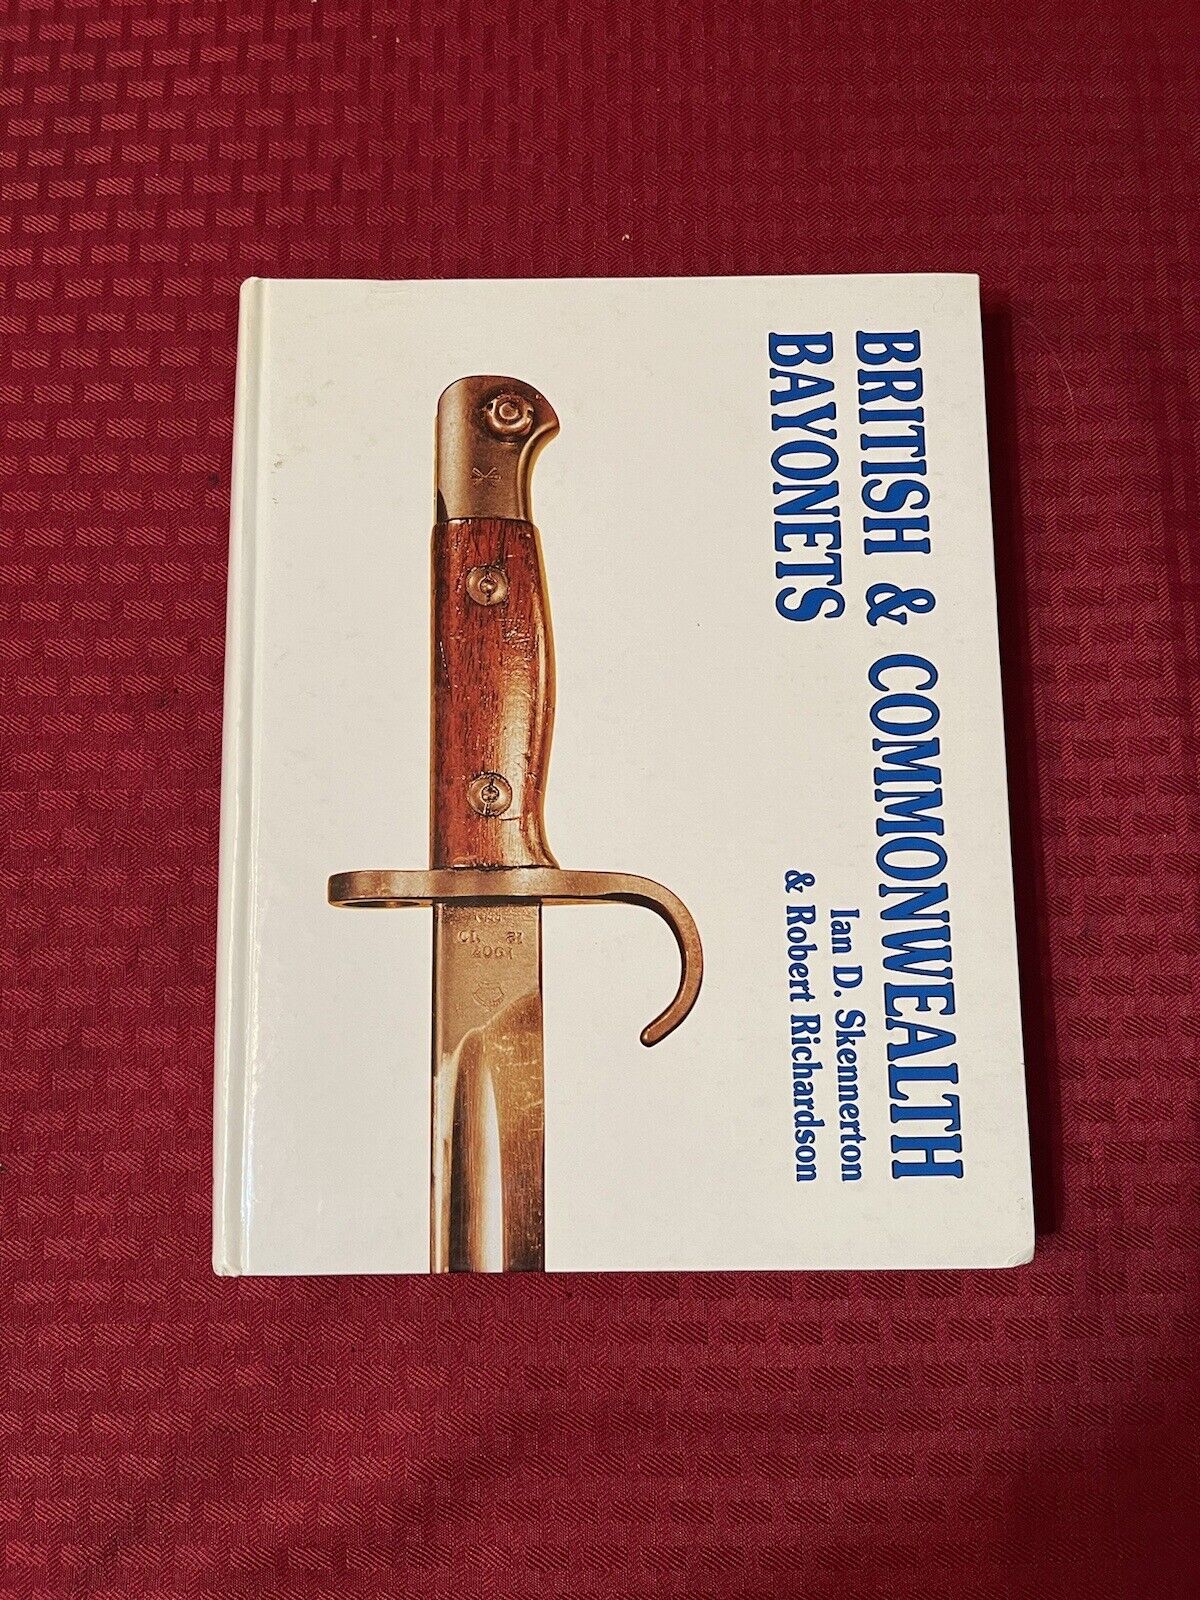 British & Commonwealth Bayonets Reference Book By Ian Skennerton Hardcover